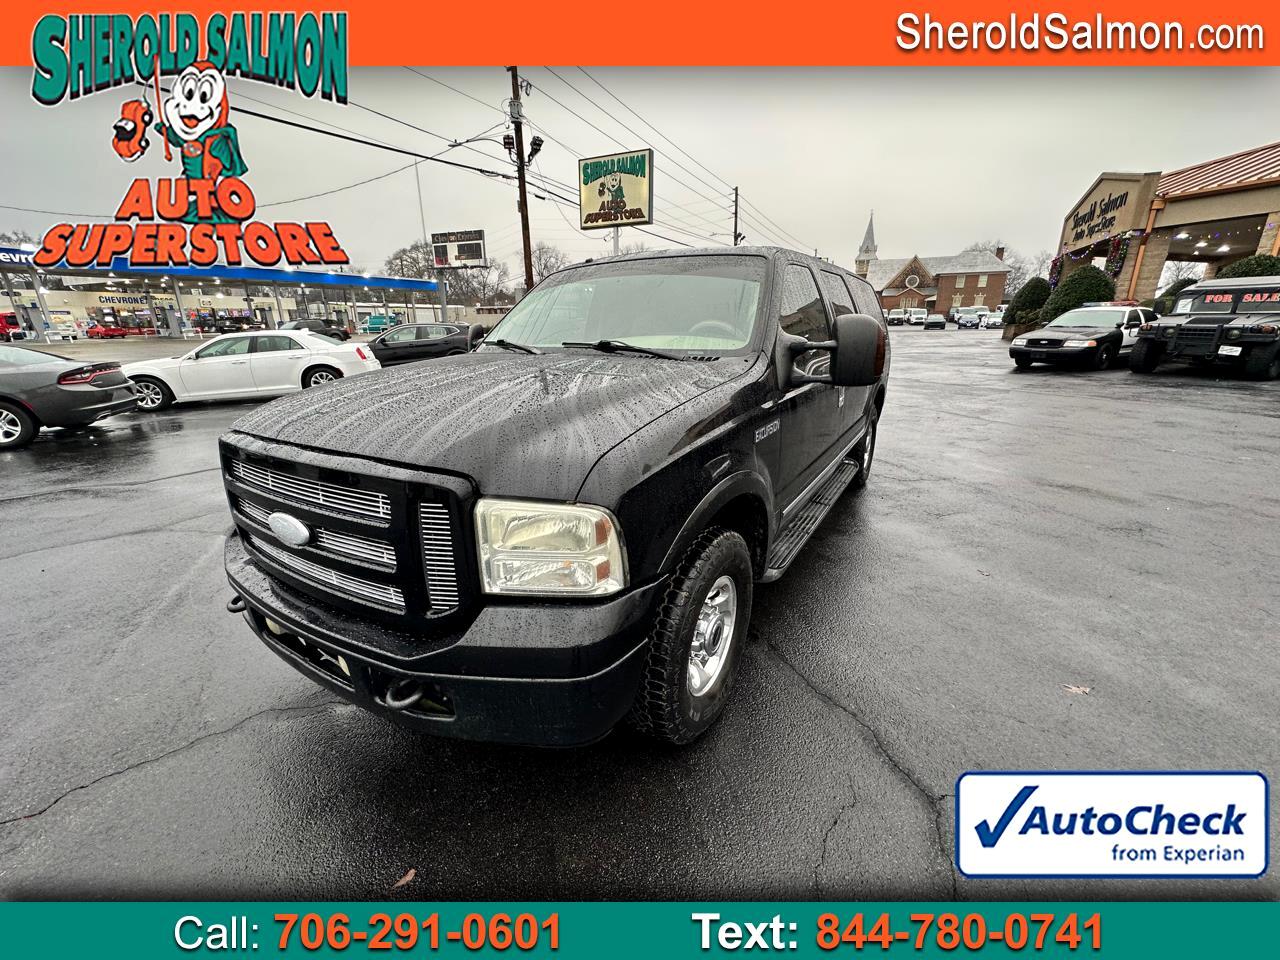 2005 Ford Excursion 137" WB 6.8L Limited